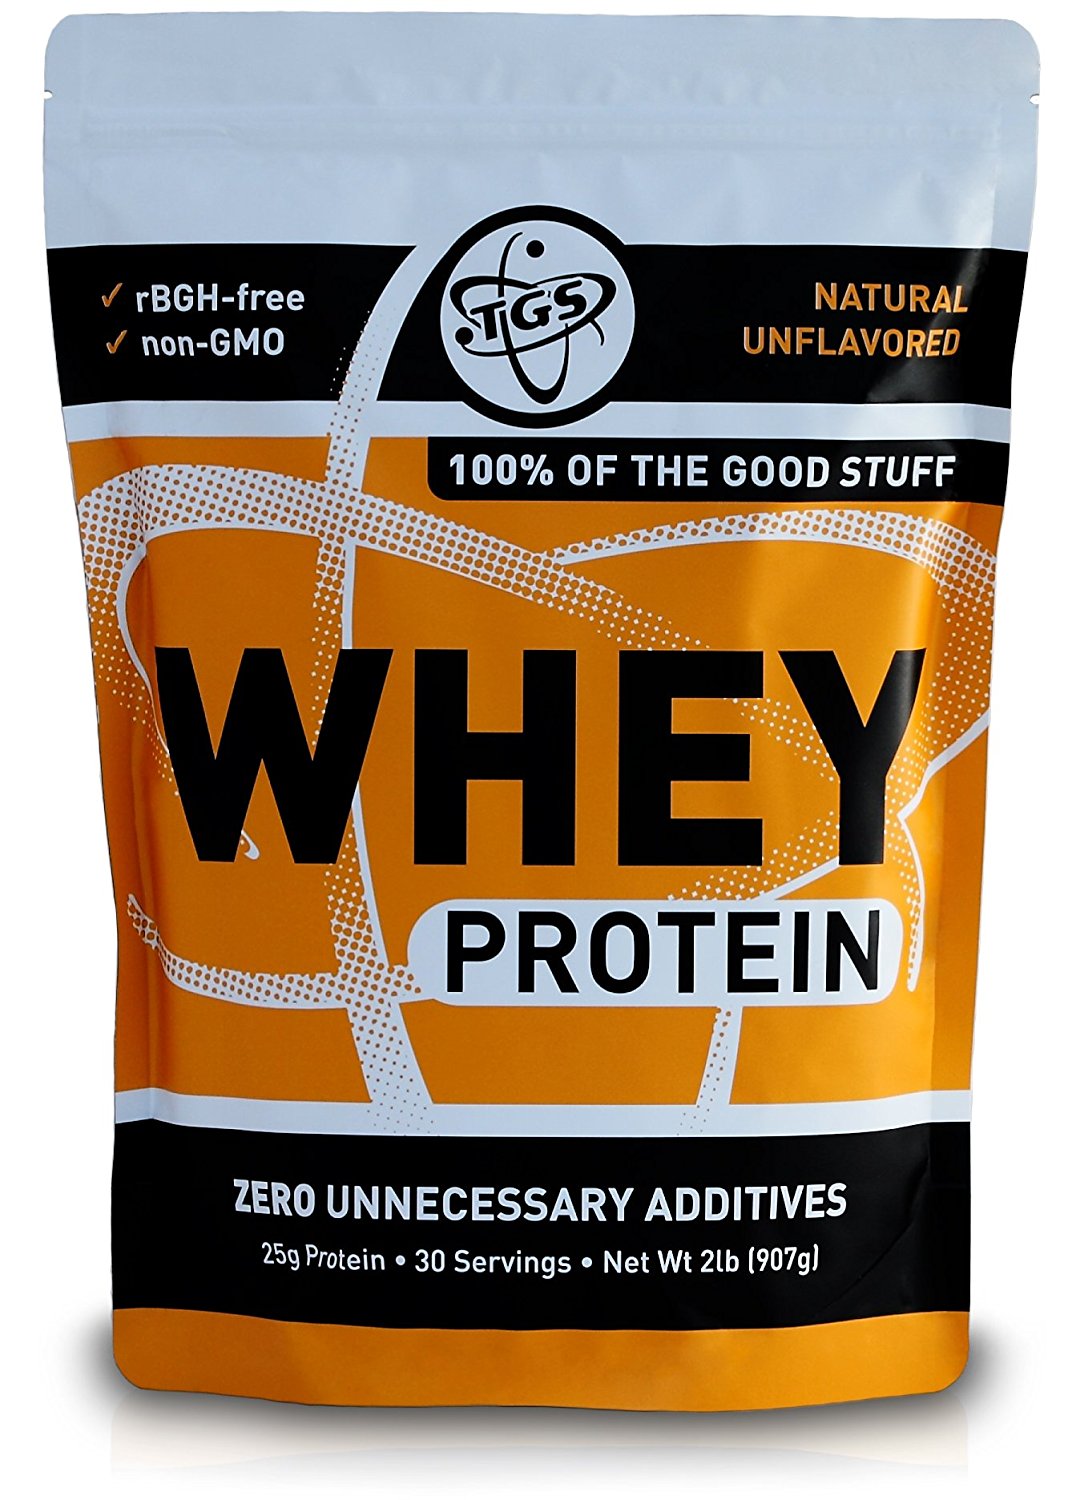 TGS Whey Protein Review | Best Protein Powders